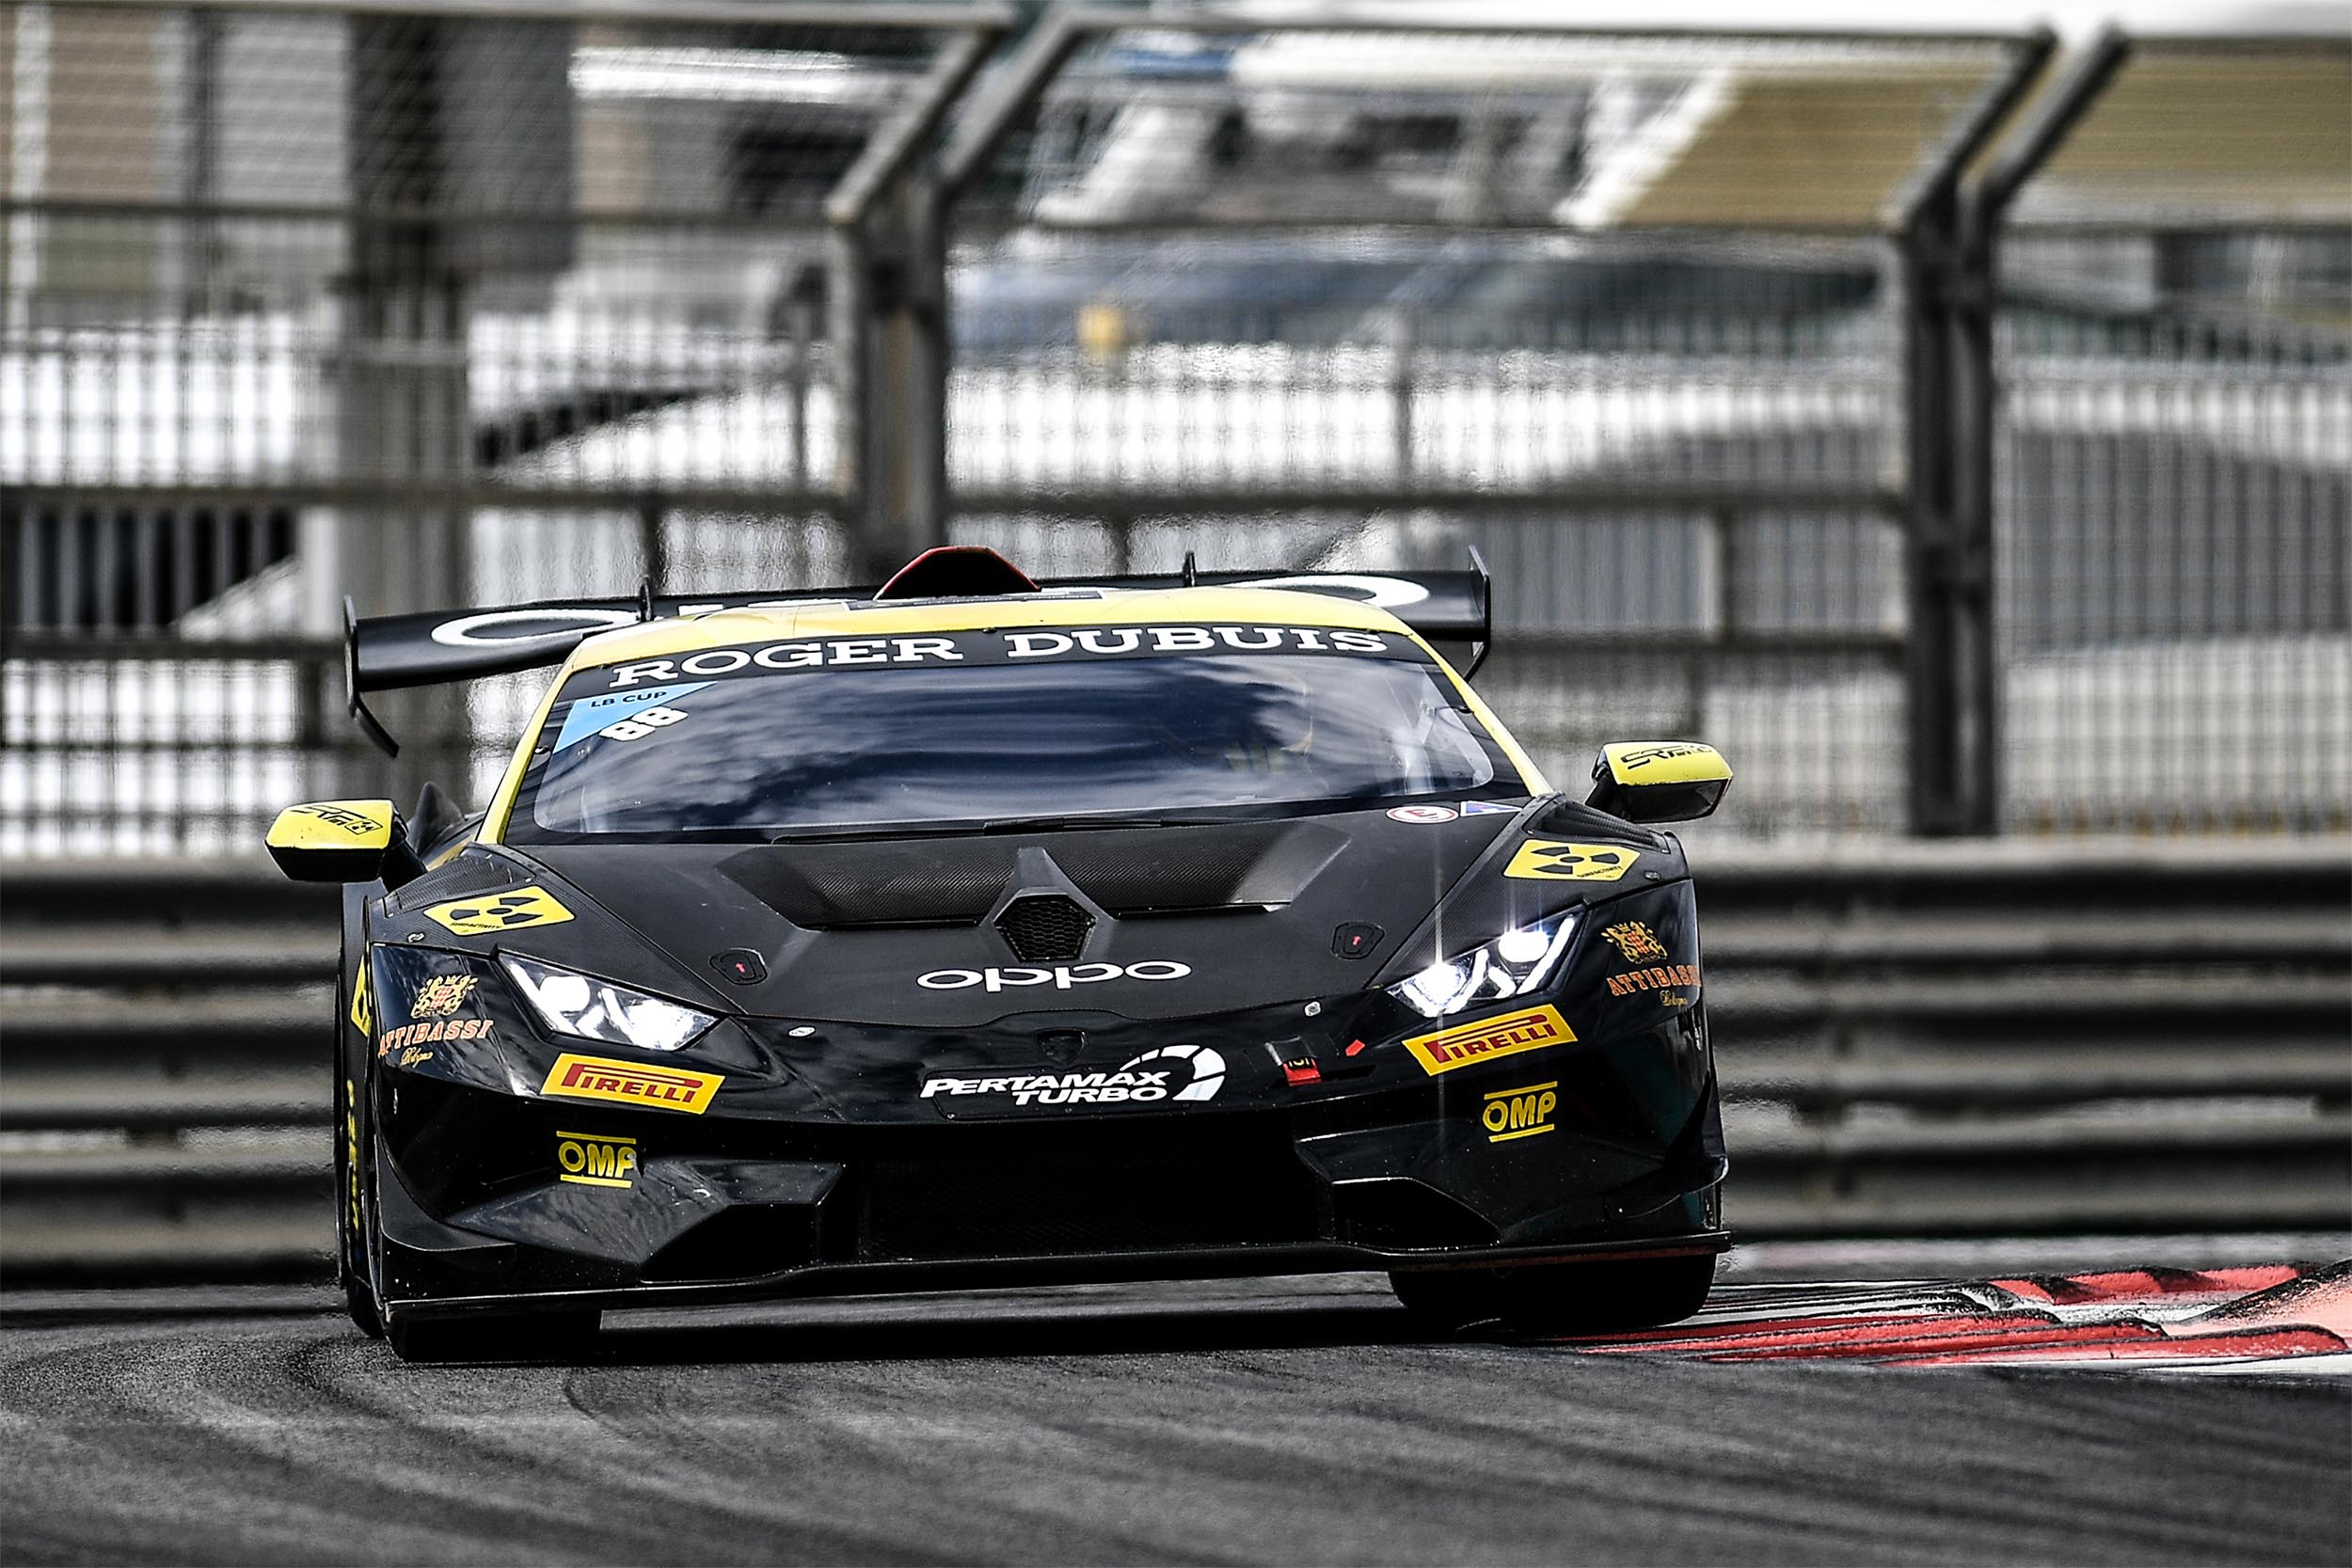 GDL Racing starts the 2019 season claiming the Super Trofeo Middle East title